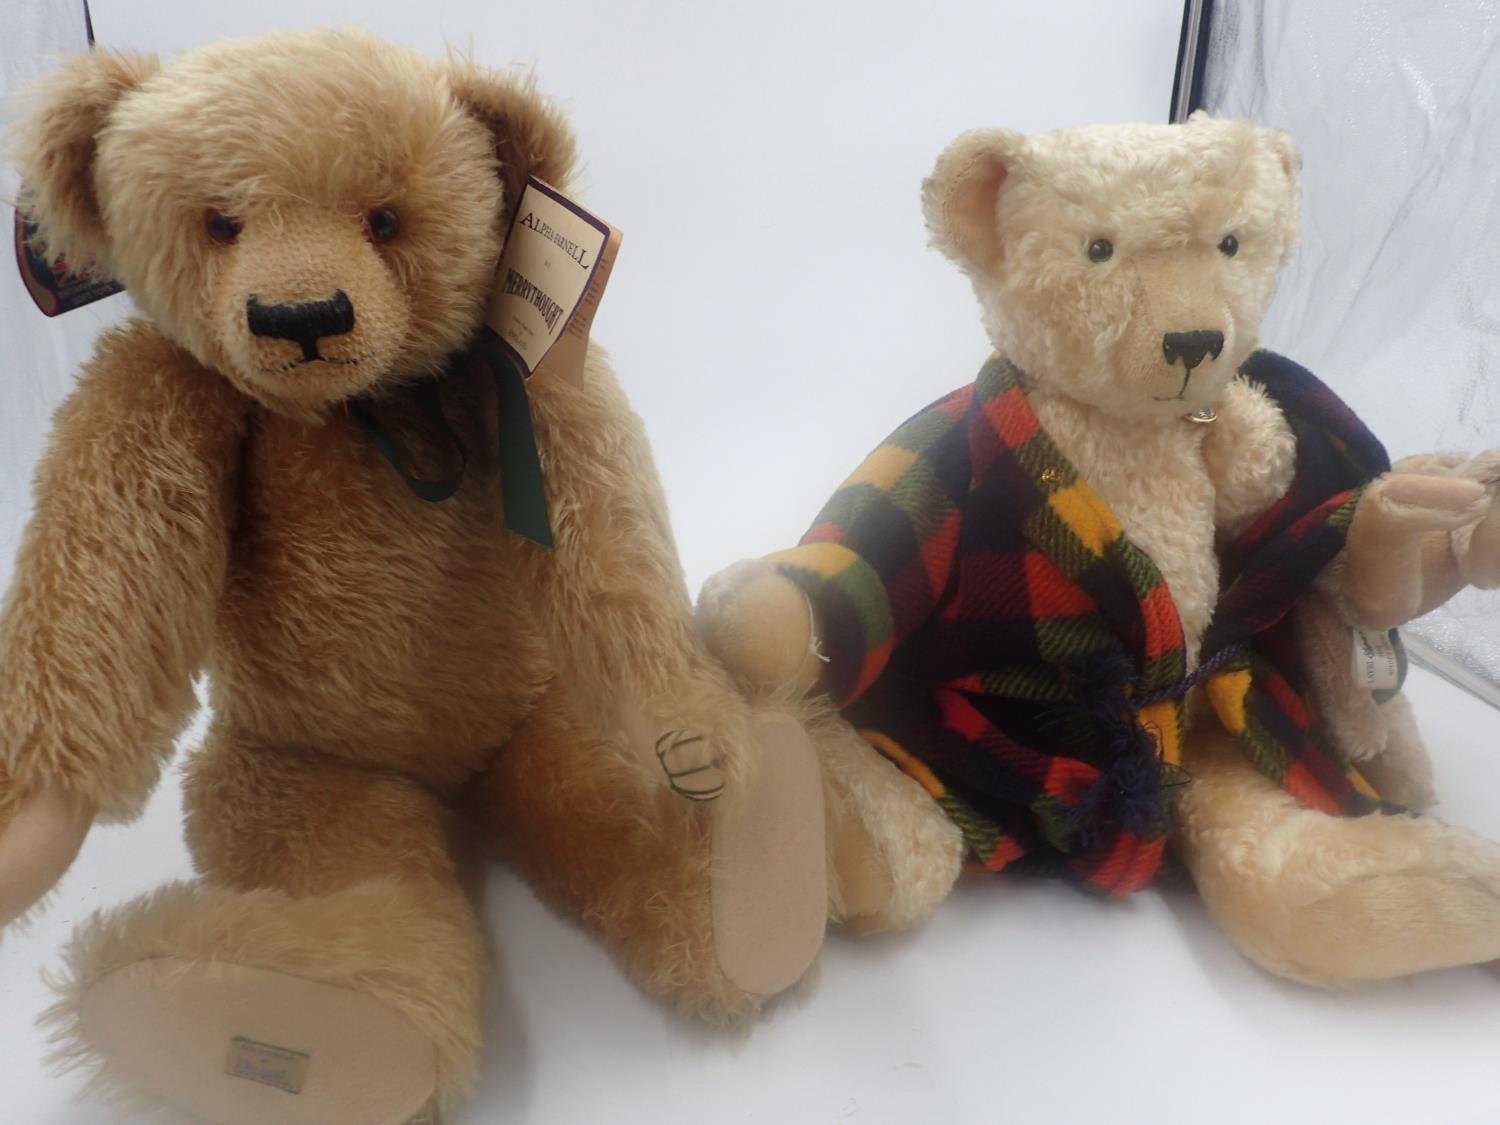 Two limited edition teddy bears, Merrythought 17 of 500, 60cm H and a Deans, Goodnight Teddy Jnr, 63